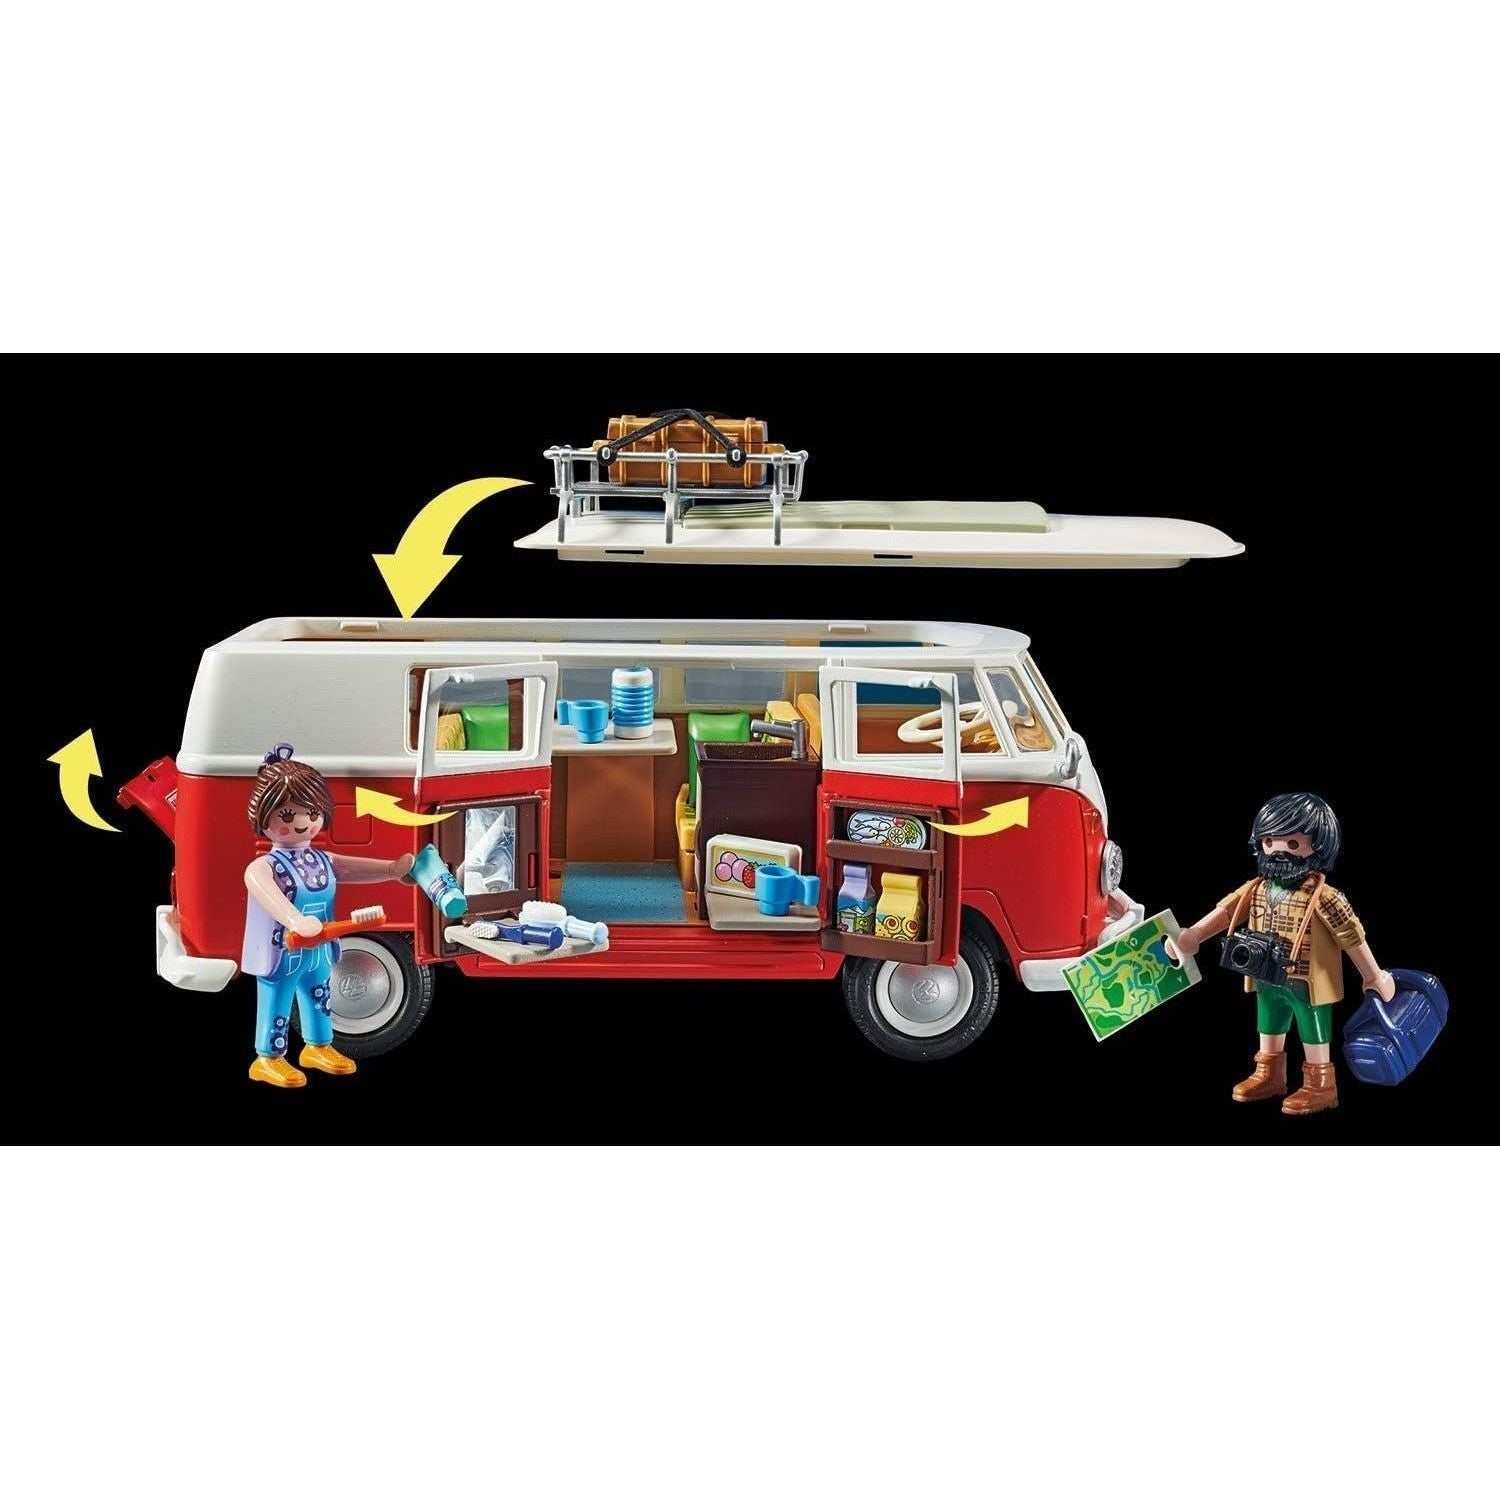 Playmobil Volkswagen T1 Camping Bus 70176 - BumbleToys - 5-7 Years, 6+ Years, Amazon, Boys, Building Sets & Blocks, Cars, Girls, Pre-Order